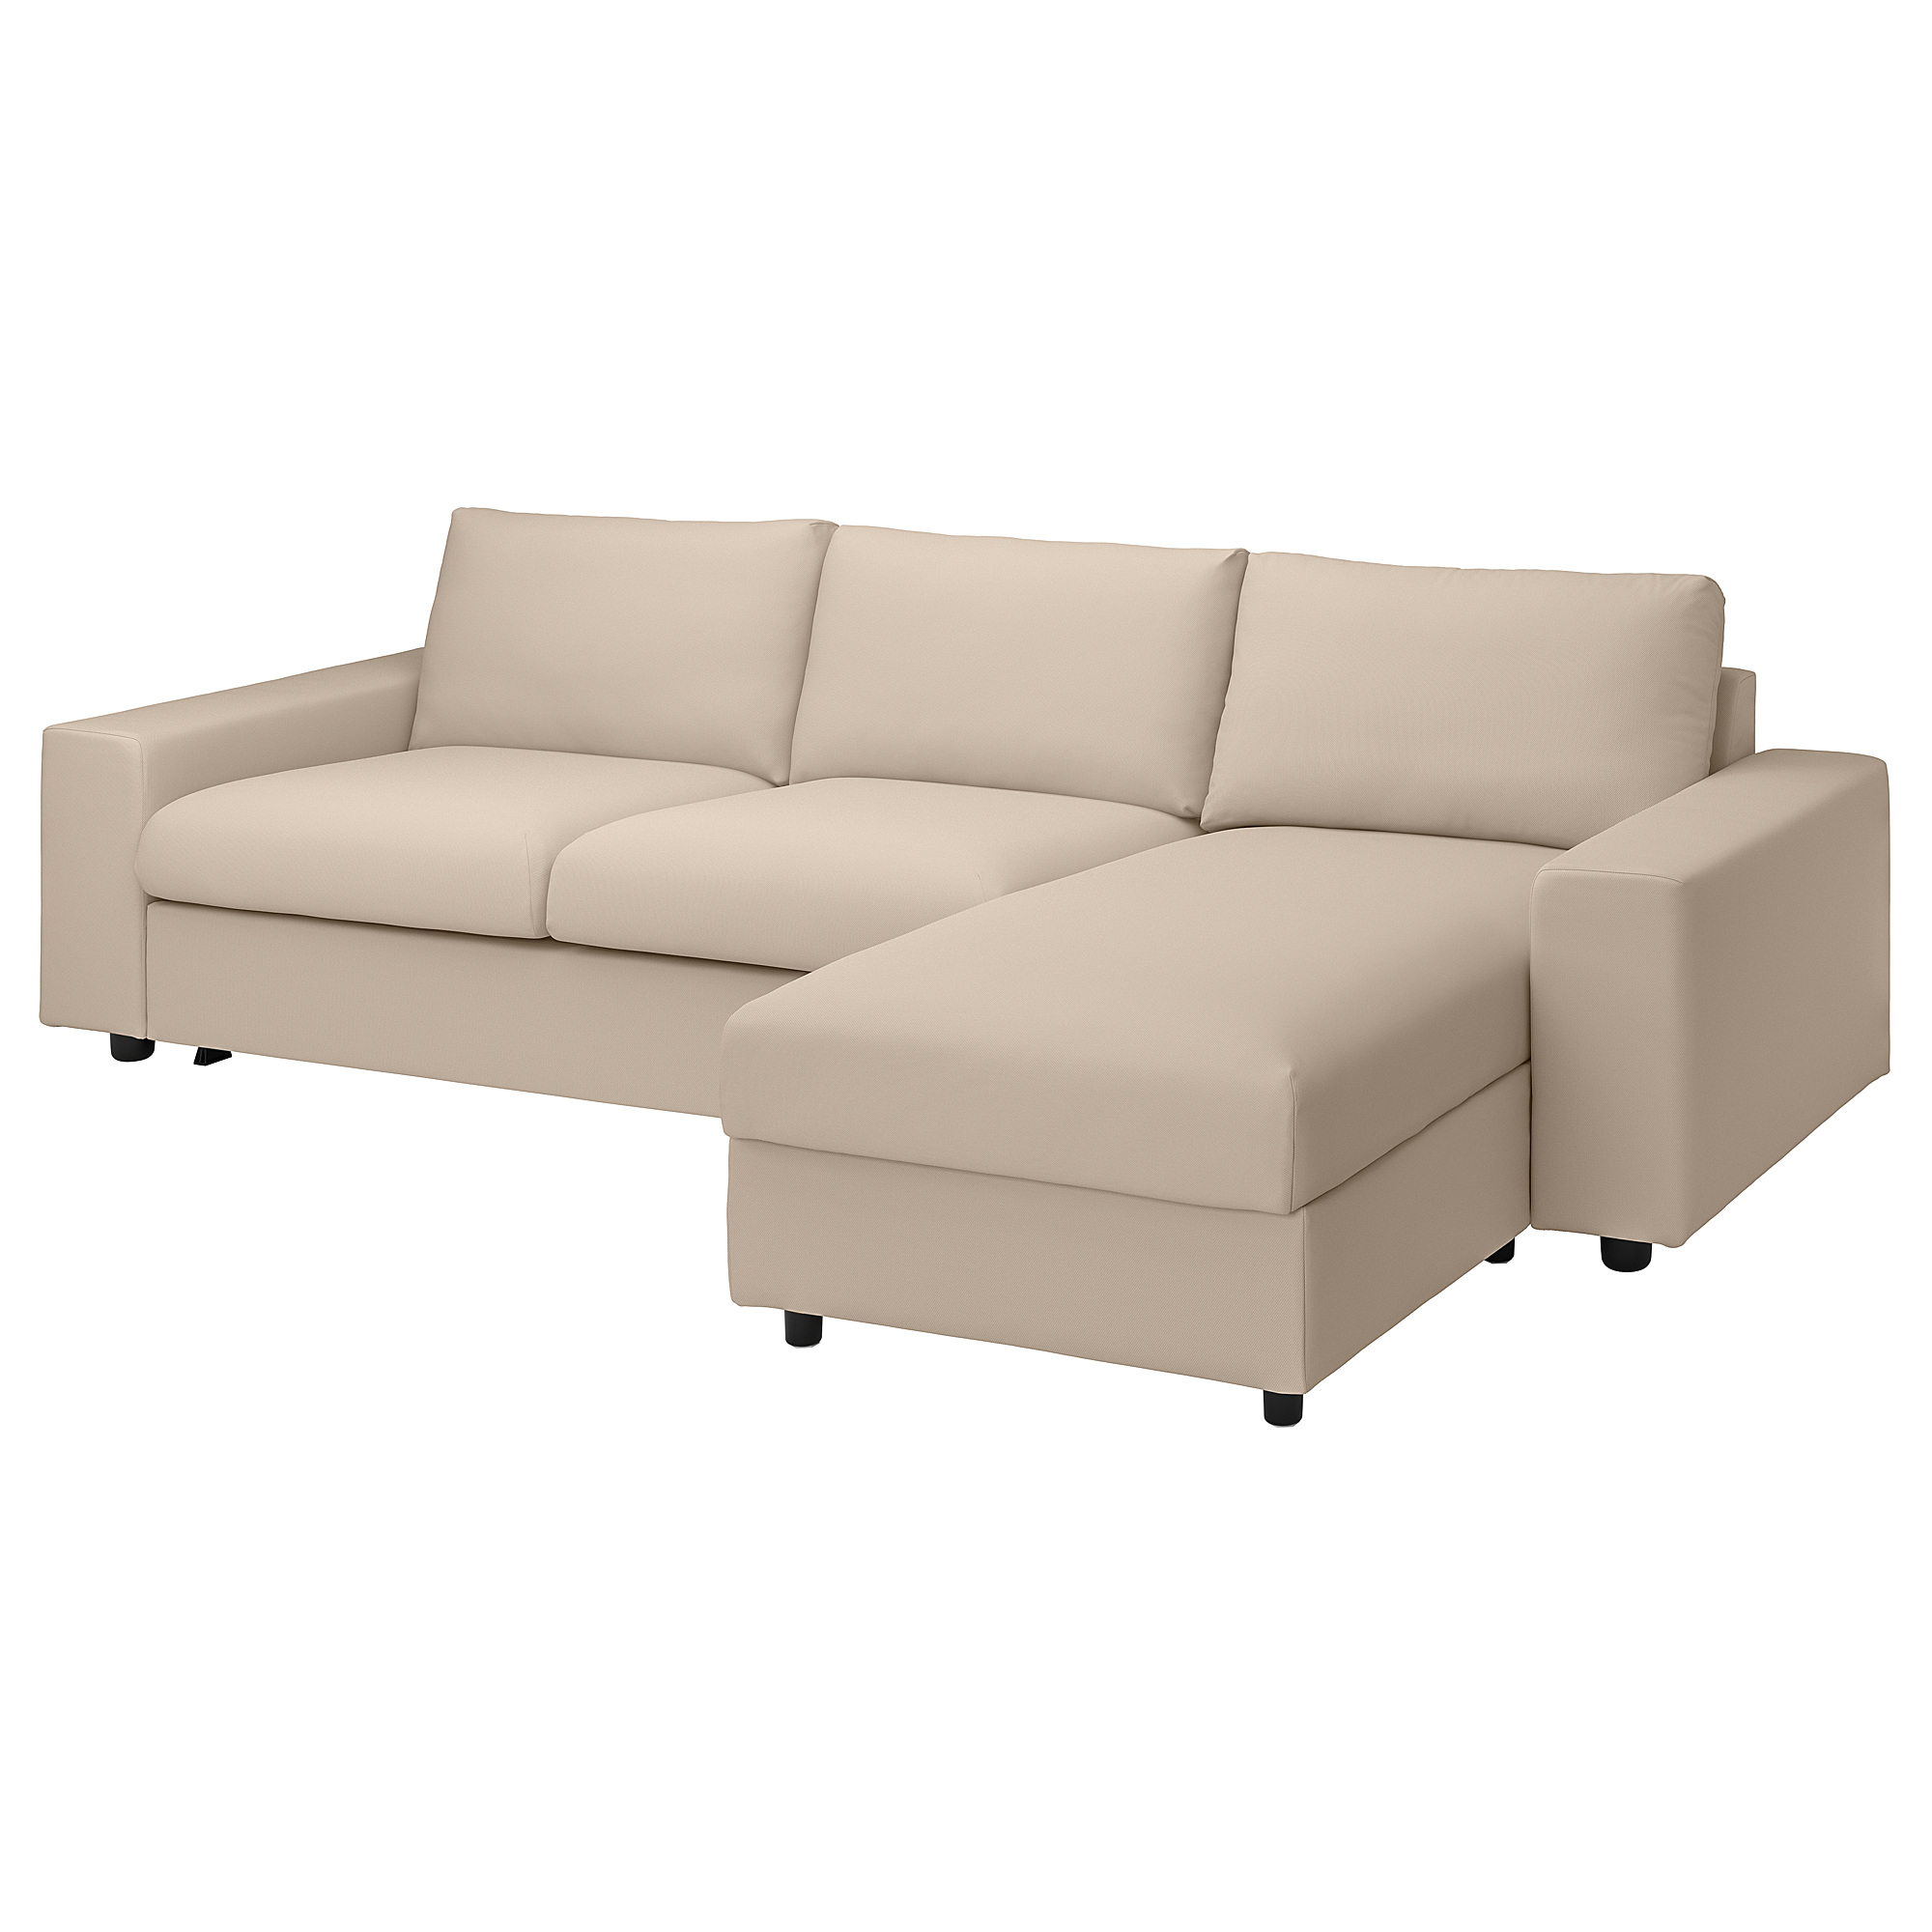 VIMLE cover 3-seat sofa-bed w chaise lng